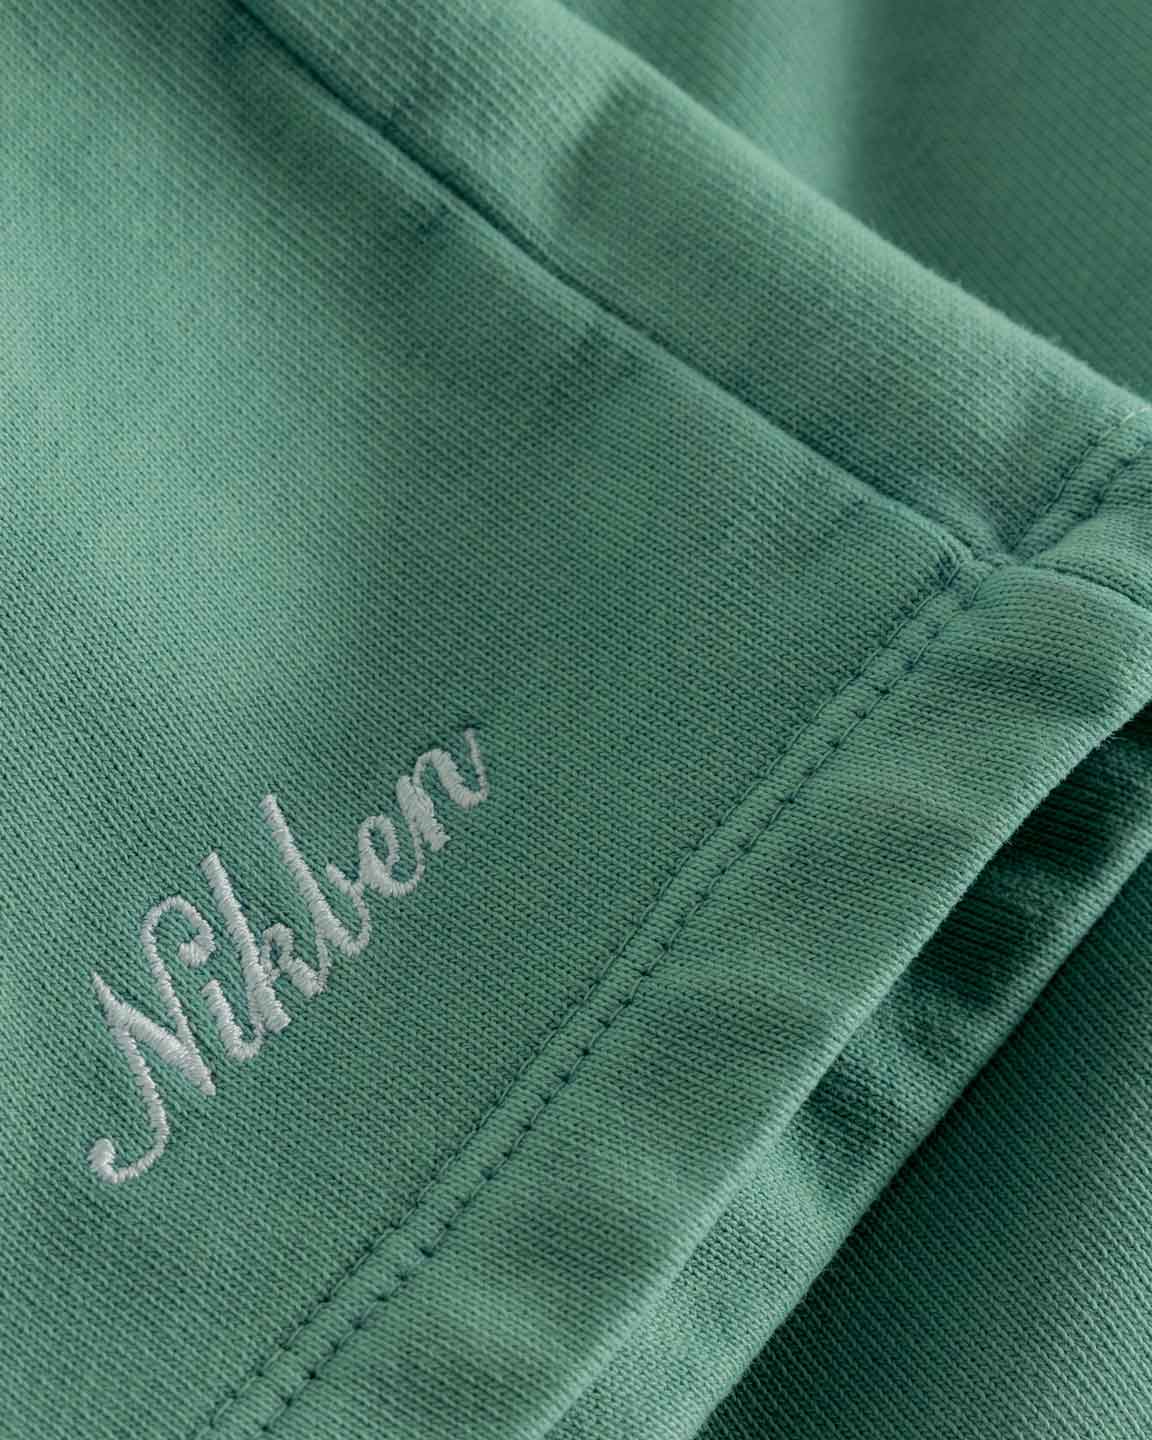 Close up on embroidered script logo on front leg of green sweatshorts